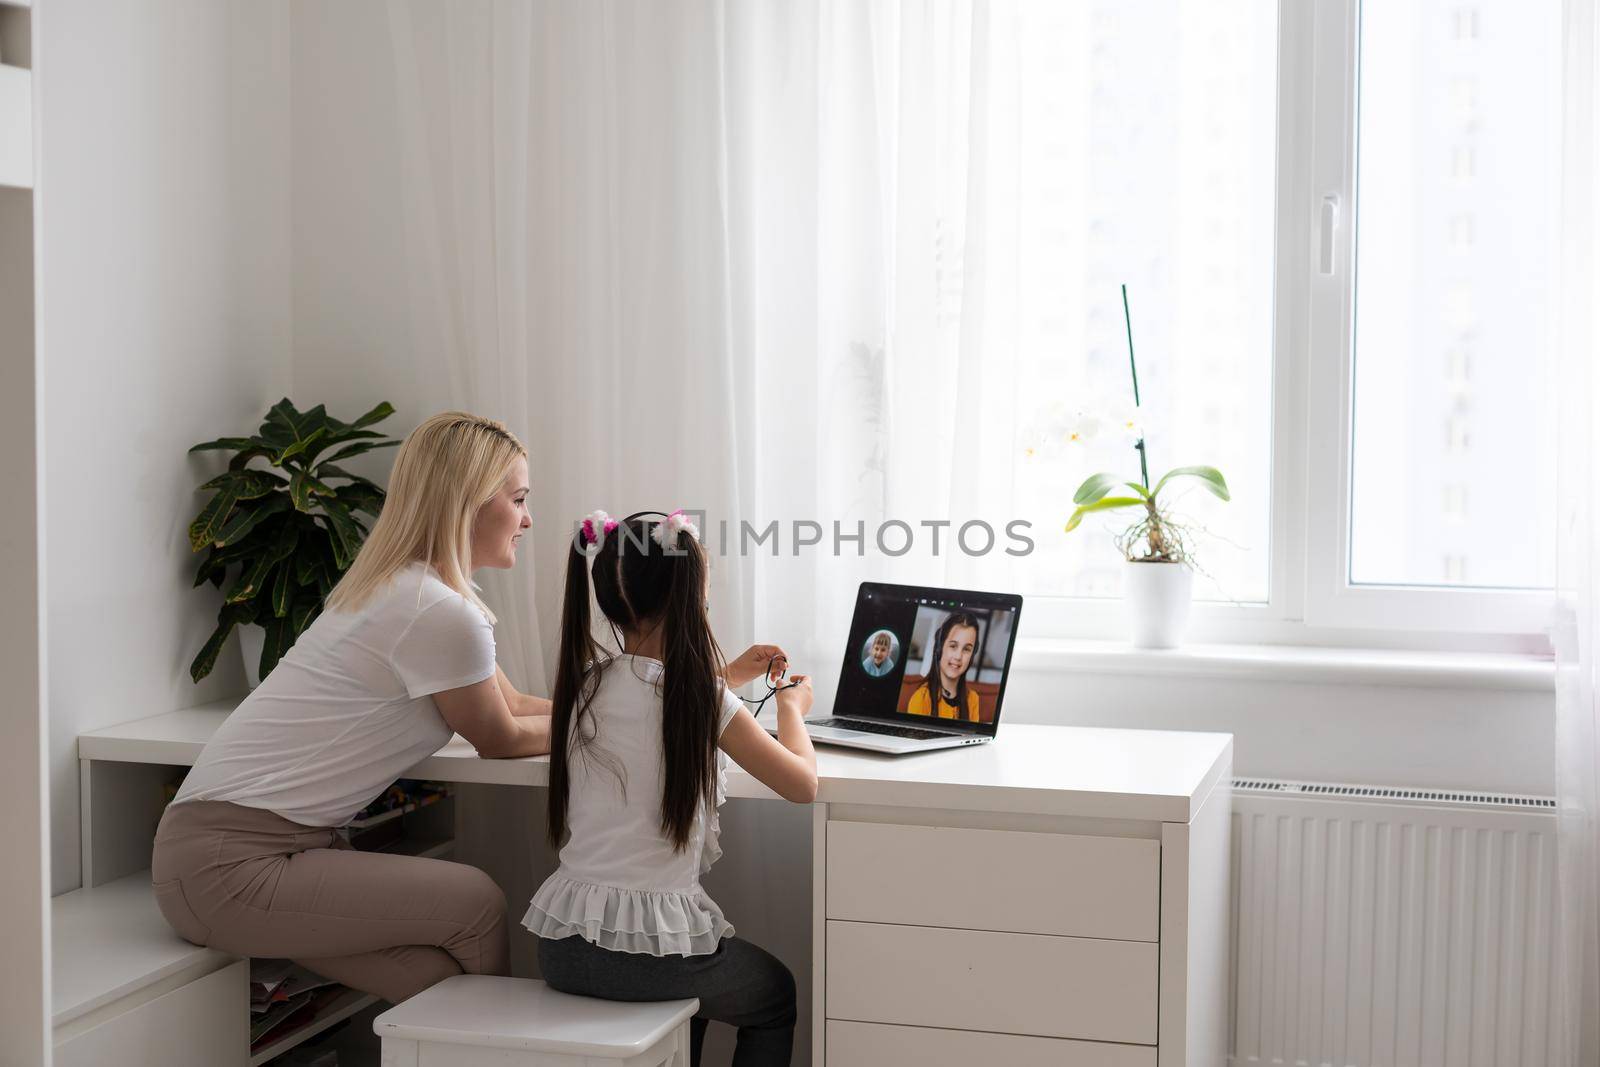 Private lesson. Attentive young woman tutor teacher help little girl pupil with studying math language correct mistakes explain learning material. Smiling mother assist small daughter with home task by Andelov13